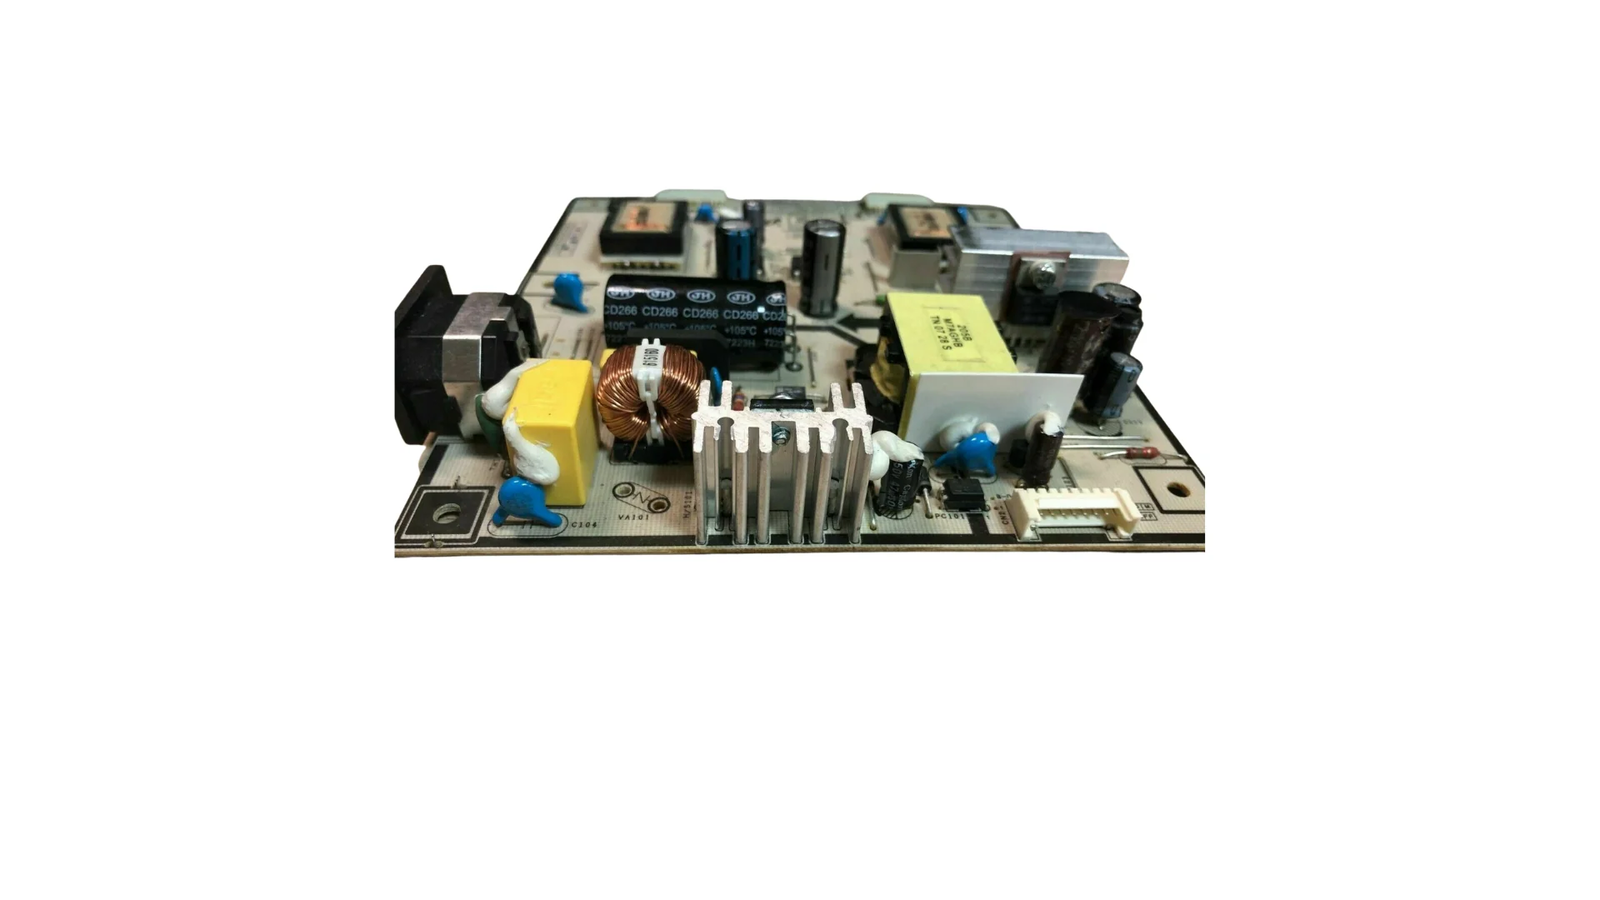 IP-43130A power supply